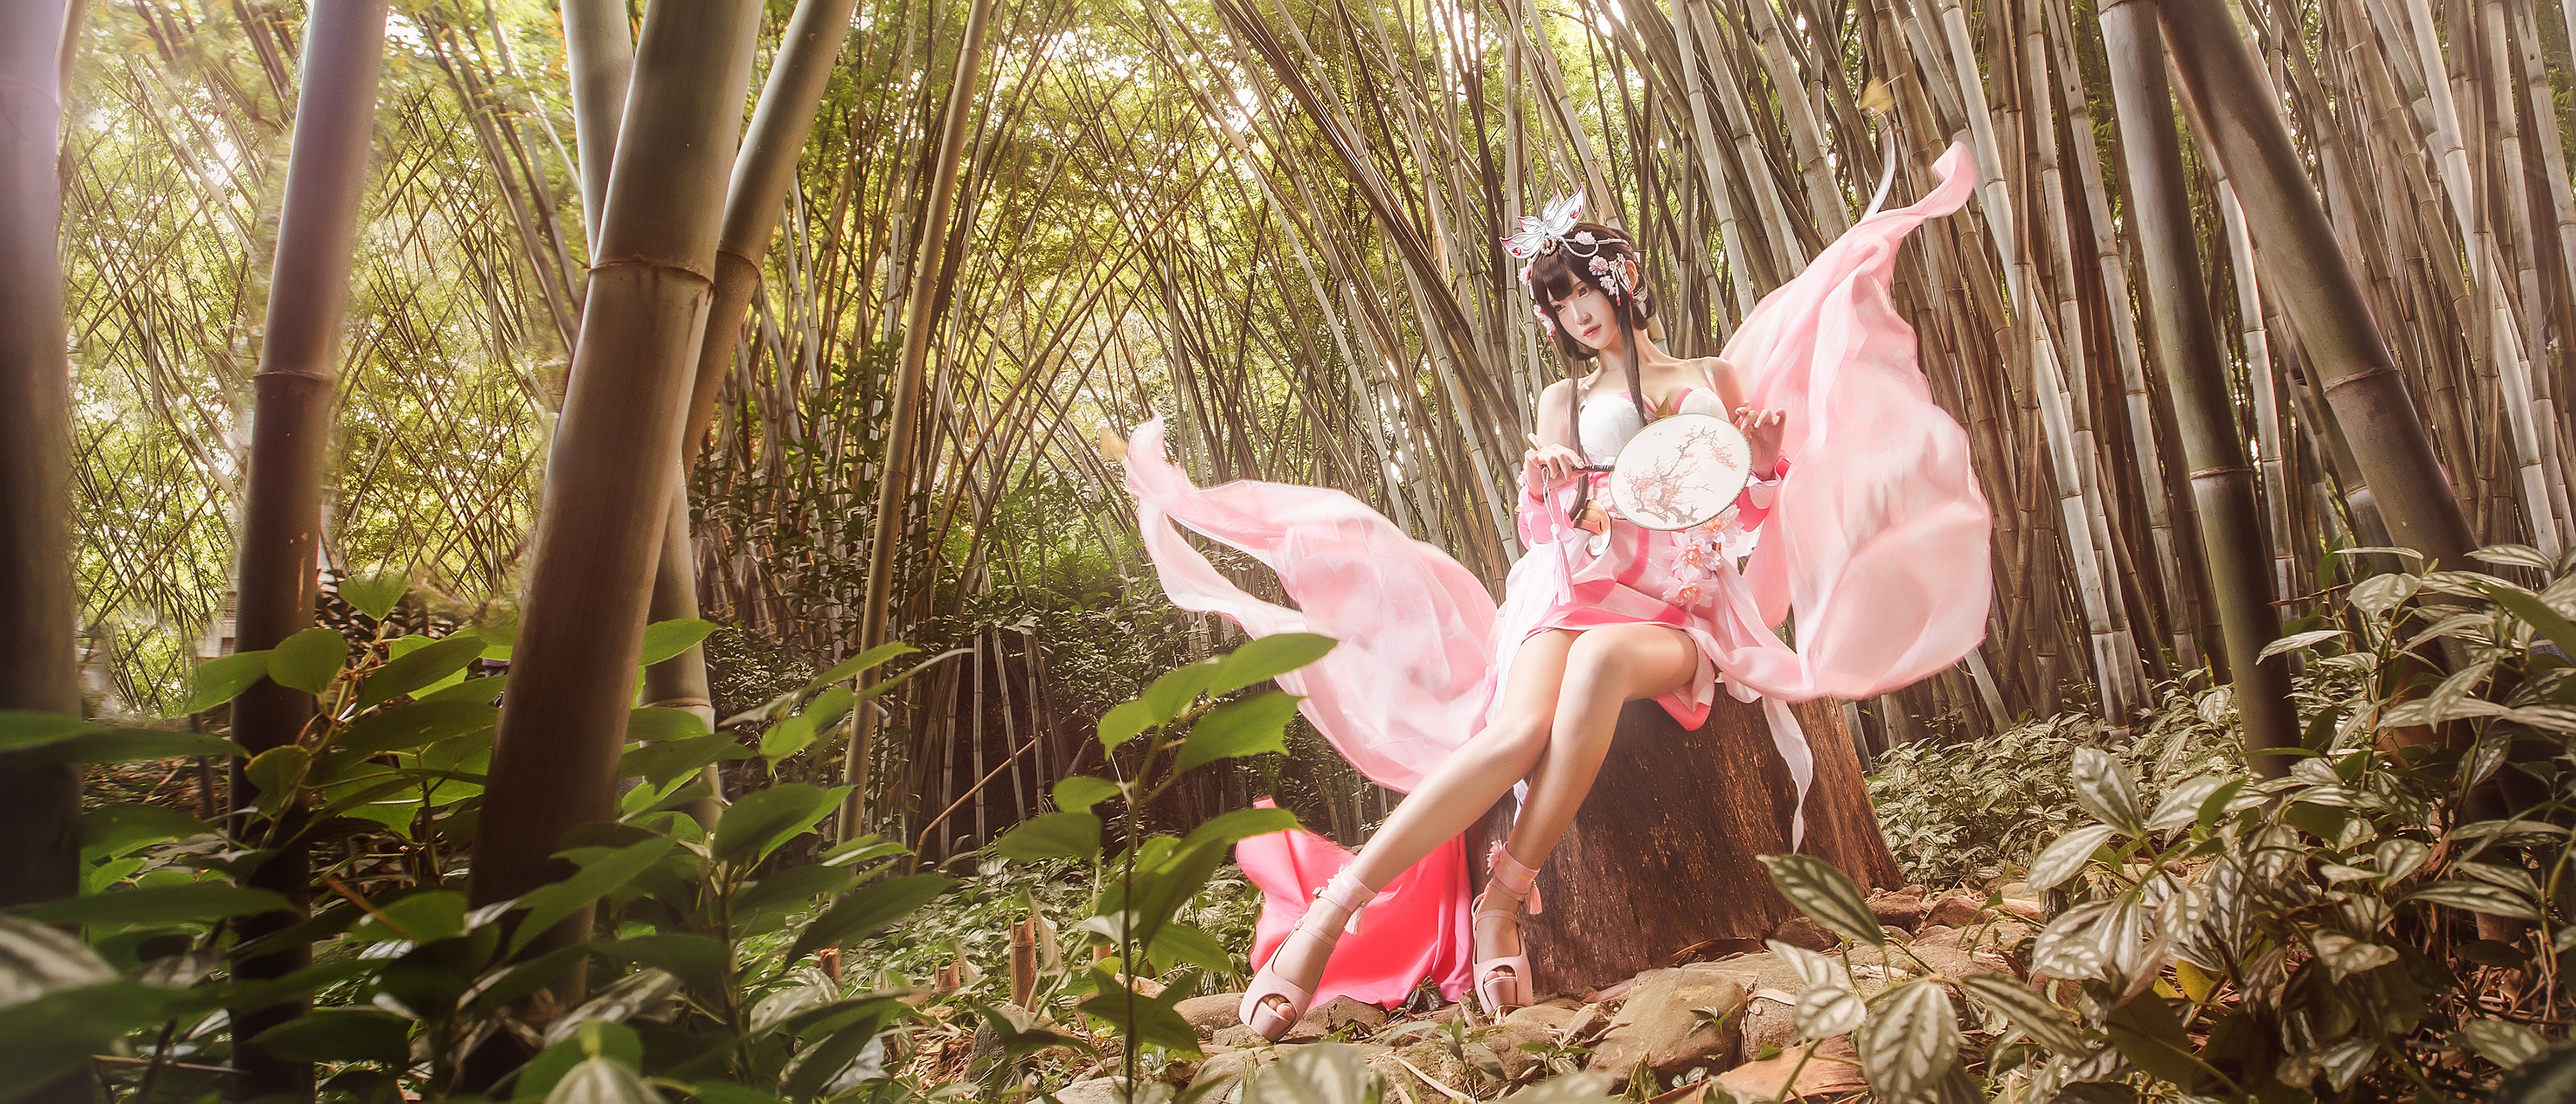 People 3900x1672 model cosplay Chinese model Asian women